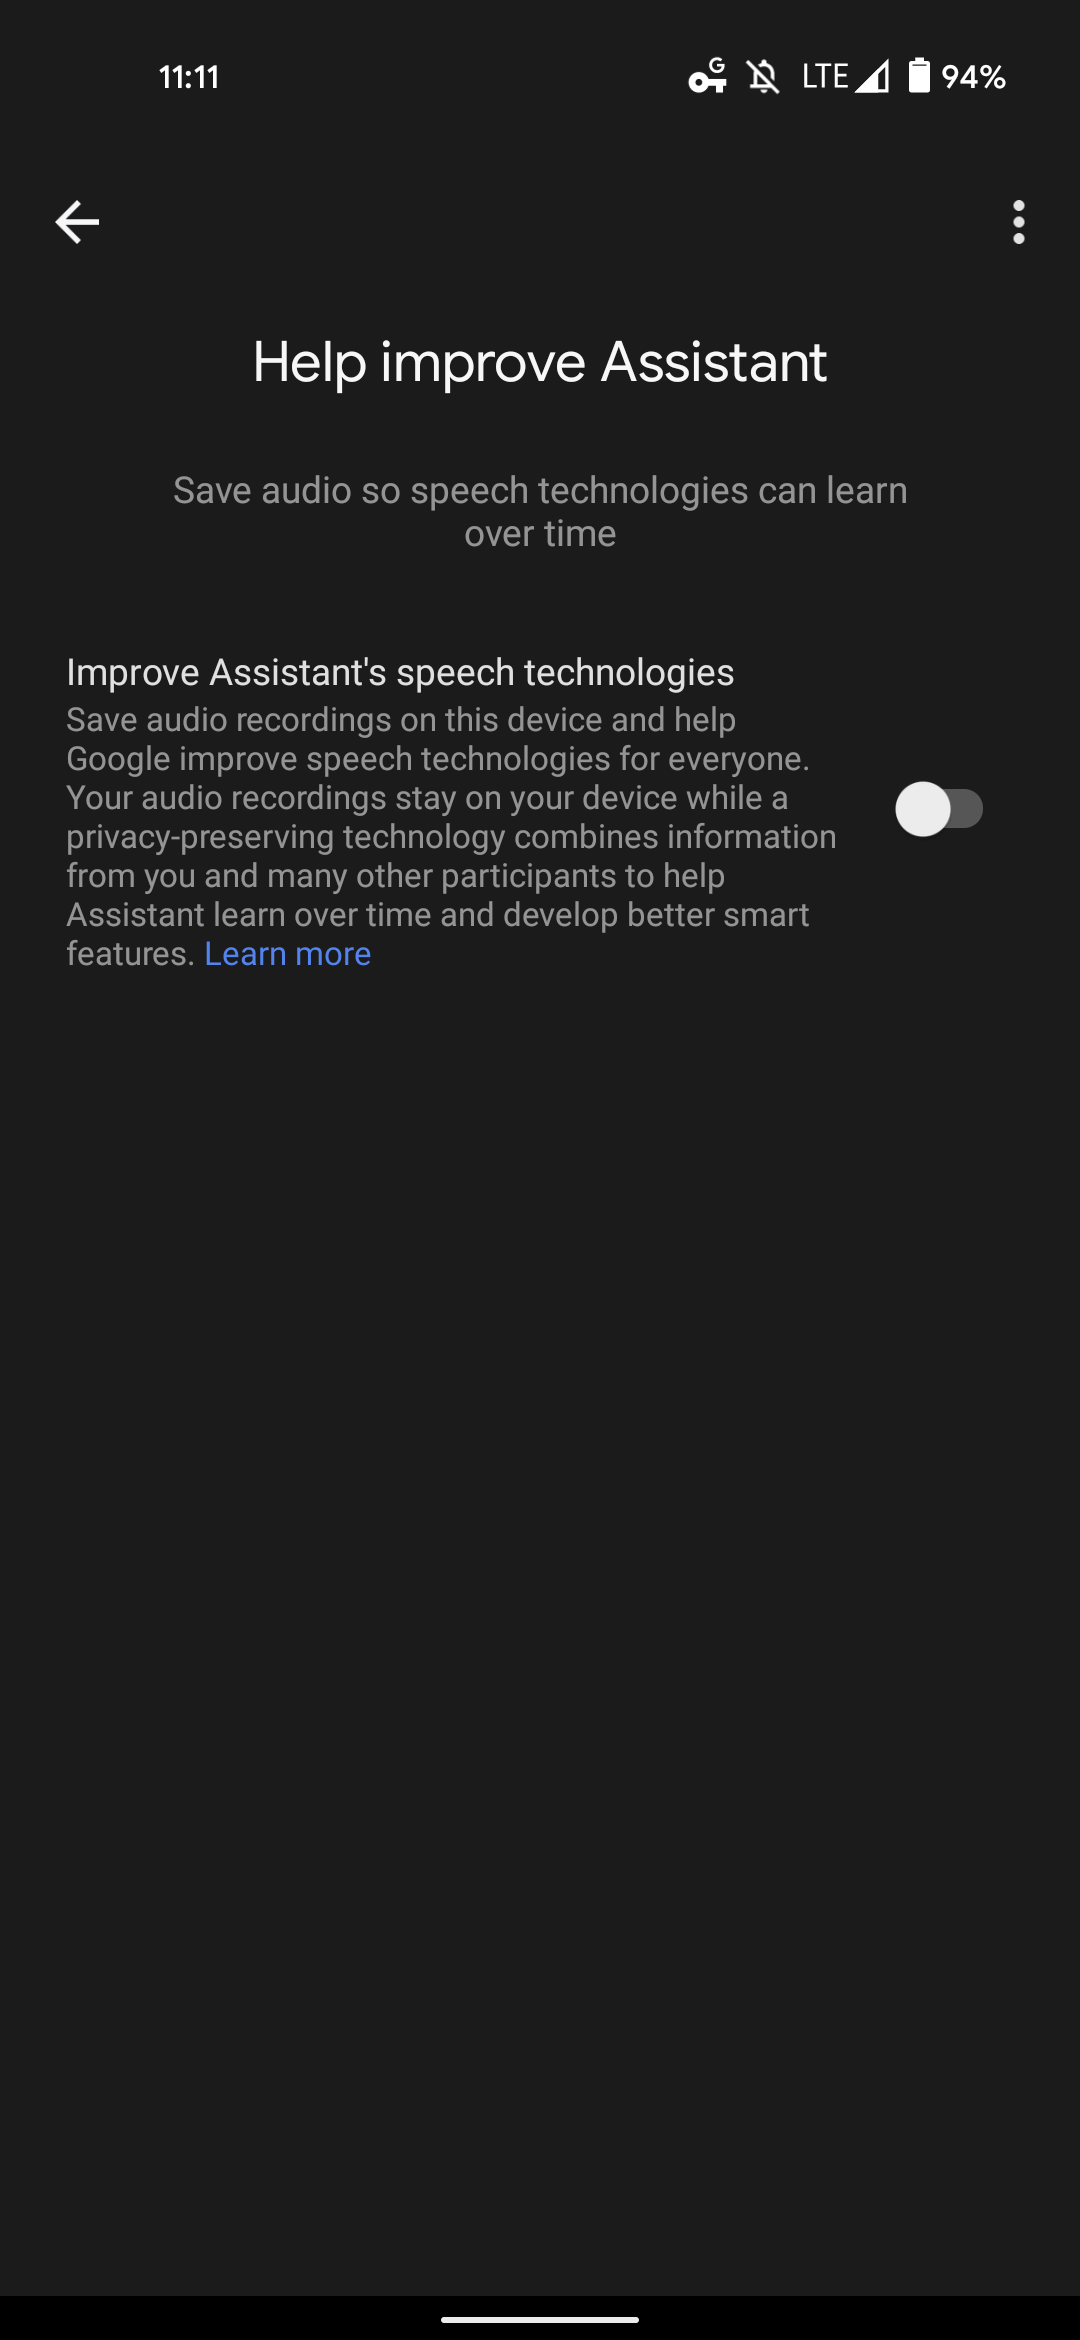 Google Assistant federated learning